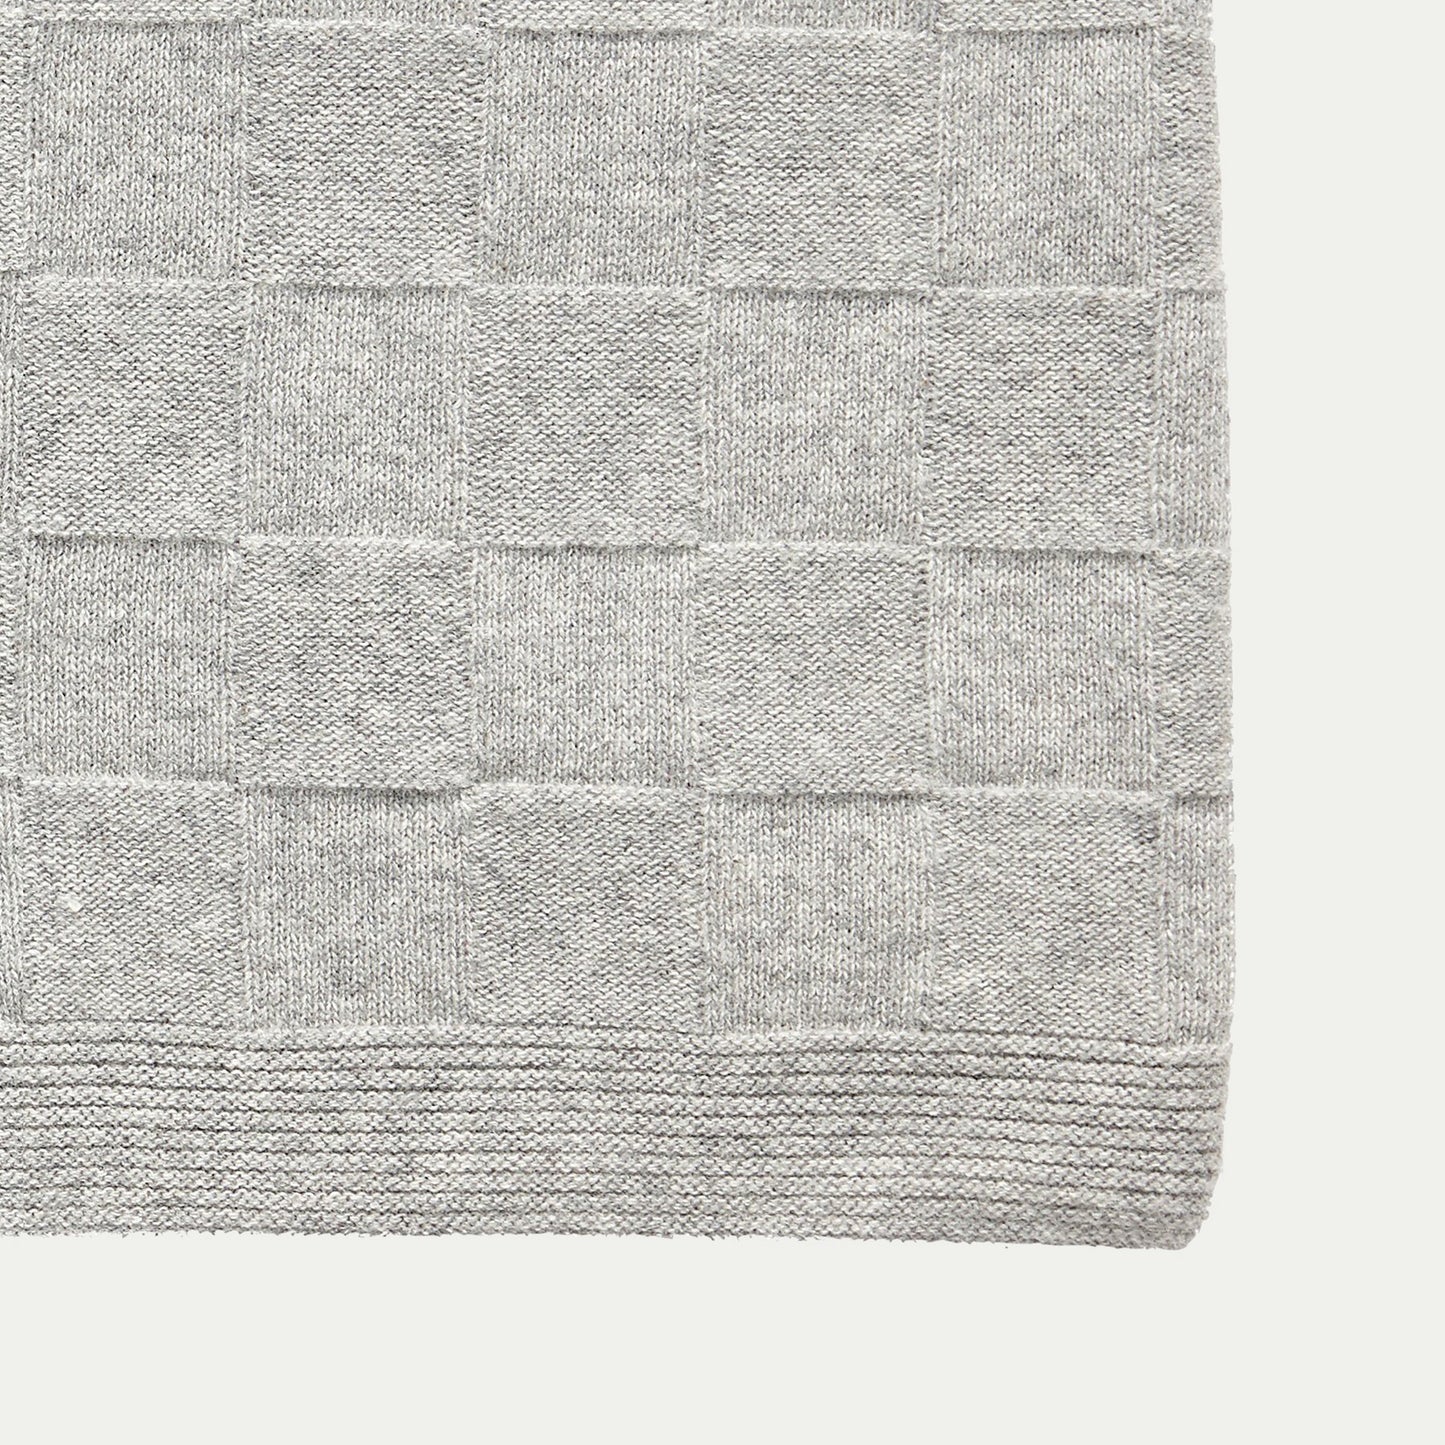 Close up of a Hubsch Interior large wool basket weave knit throw blanket in dove grey on white background